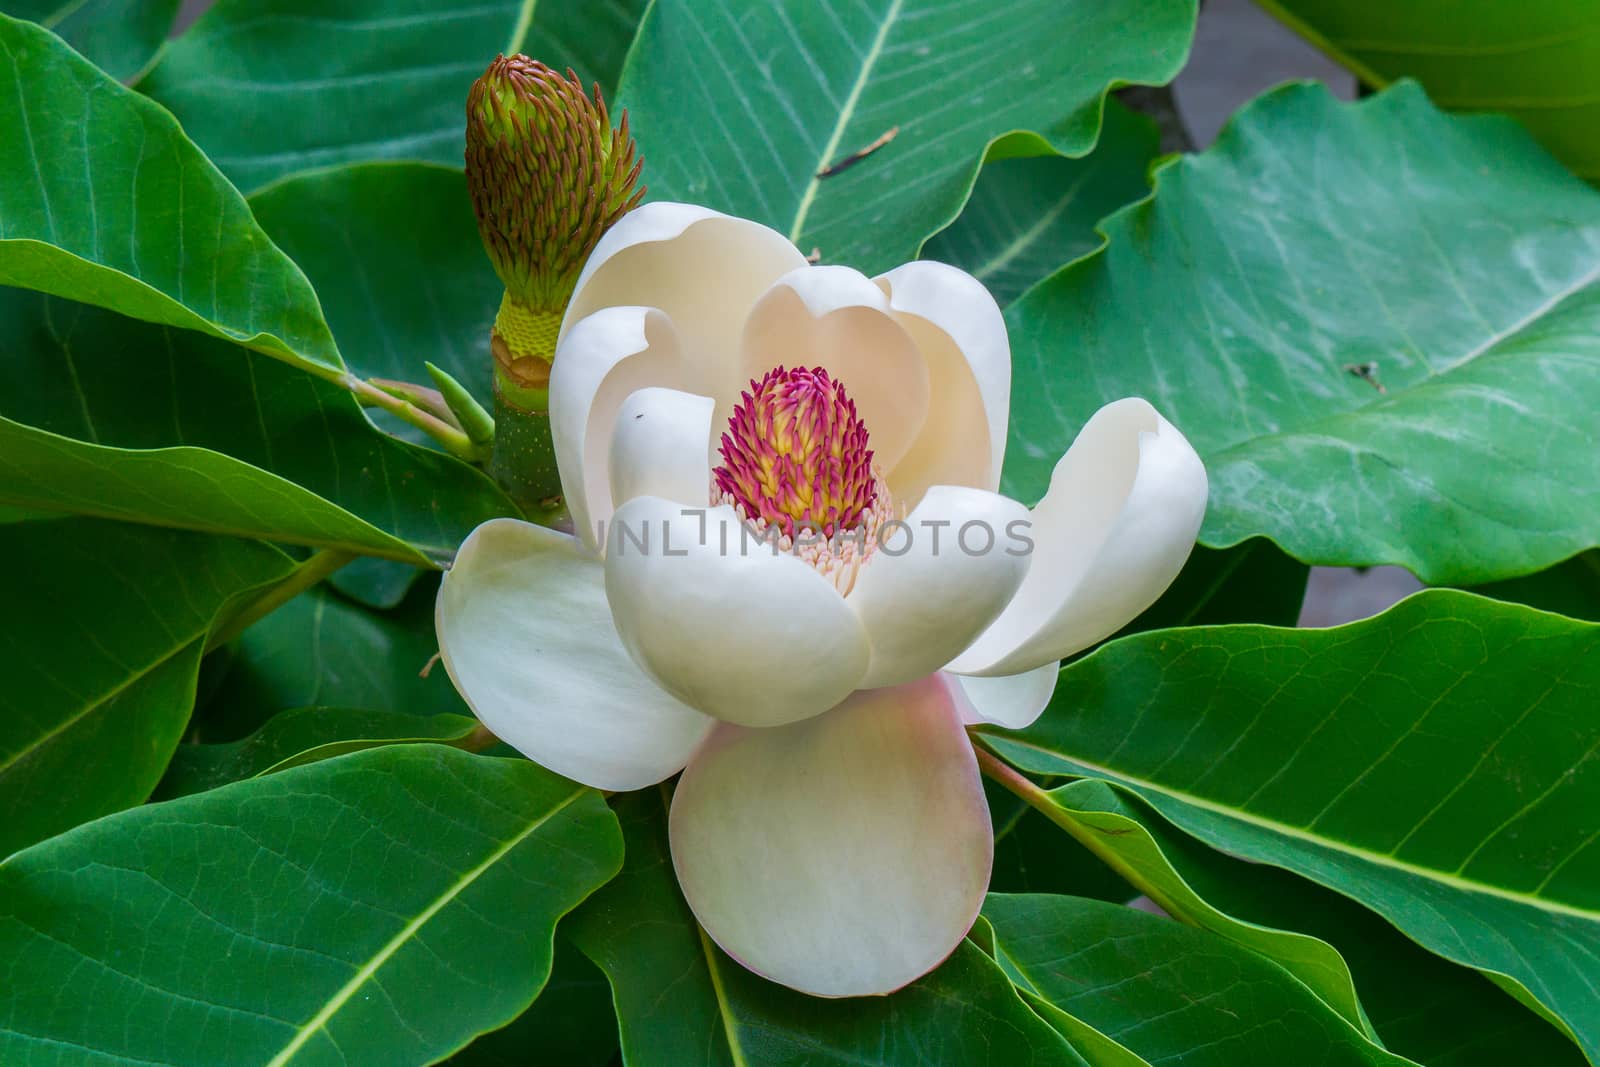 Bloomed flower with white petals and a pink core against a background of green leaves...